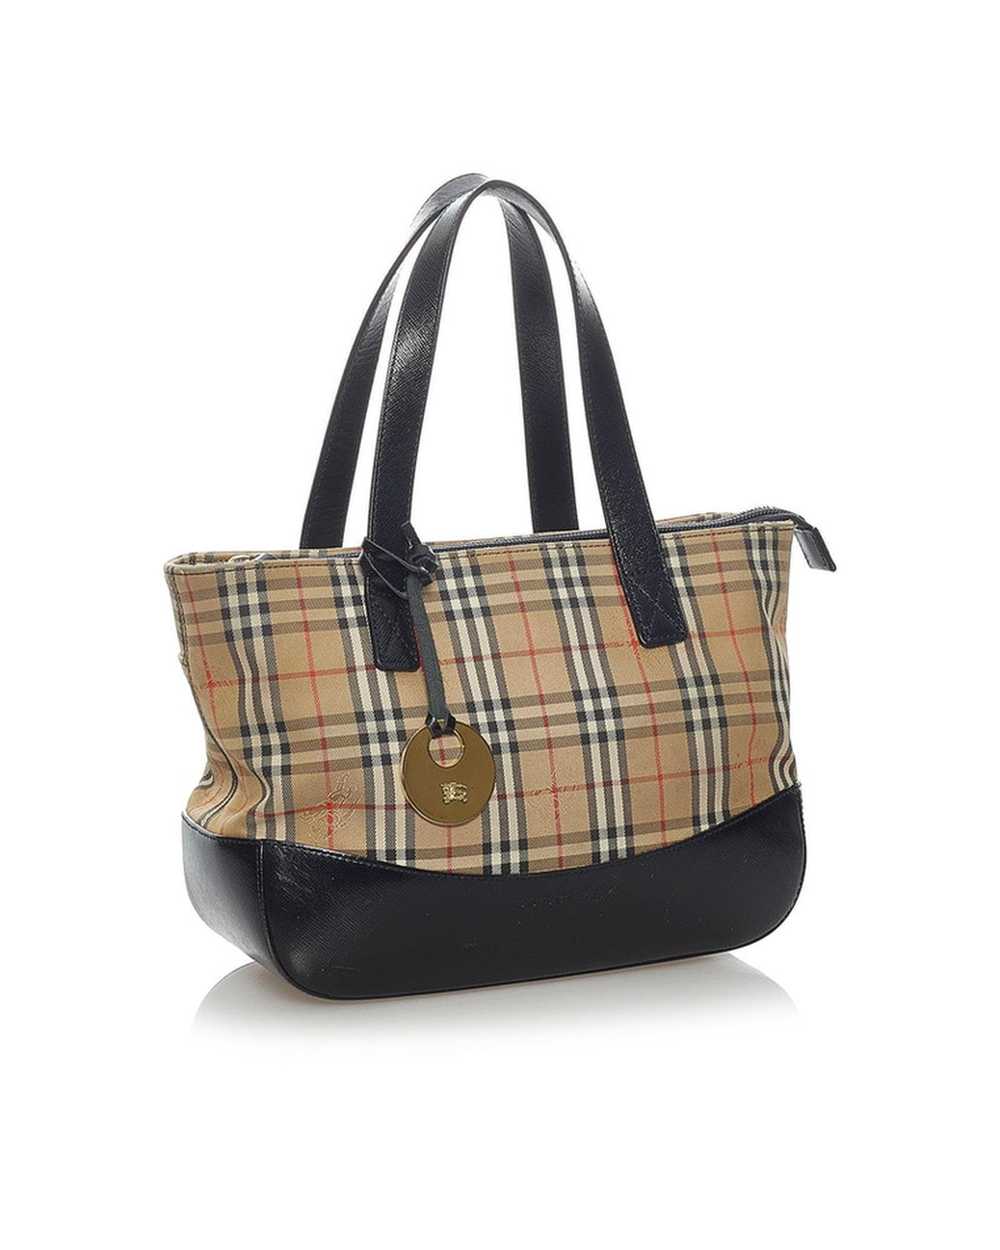 Burberry Classic Check Handbag in Brown - image 2